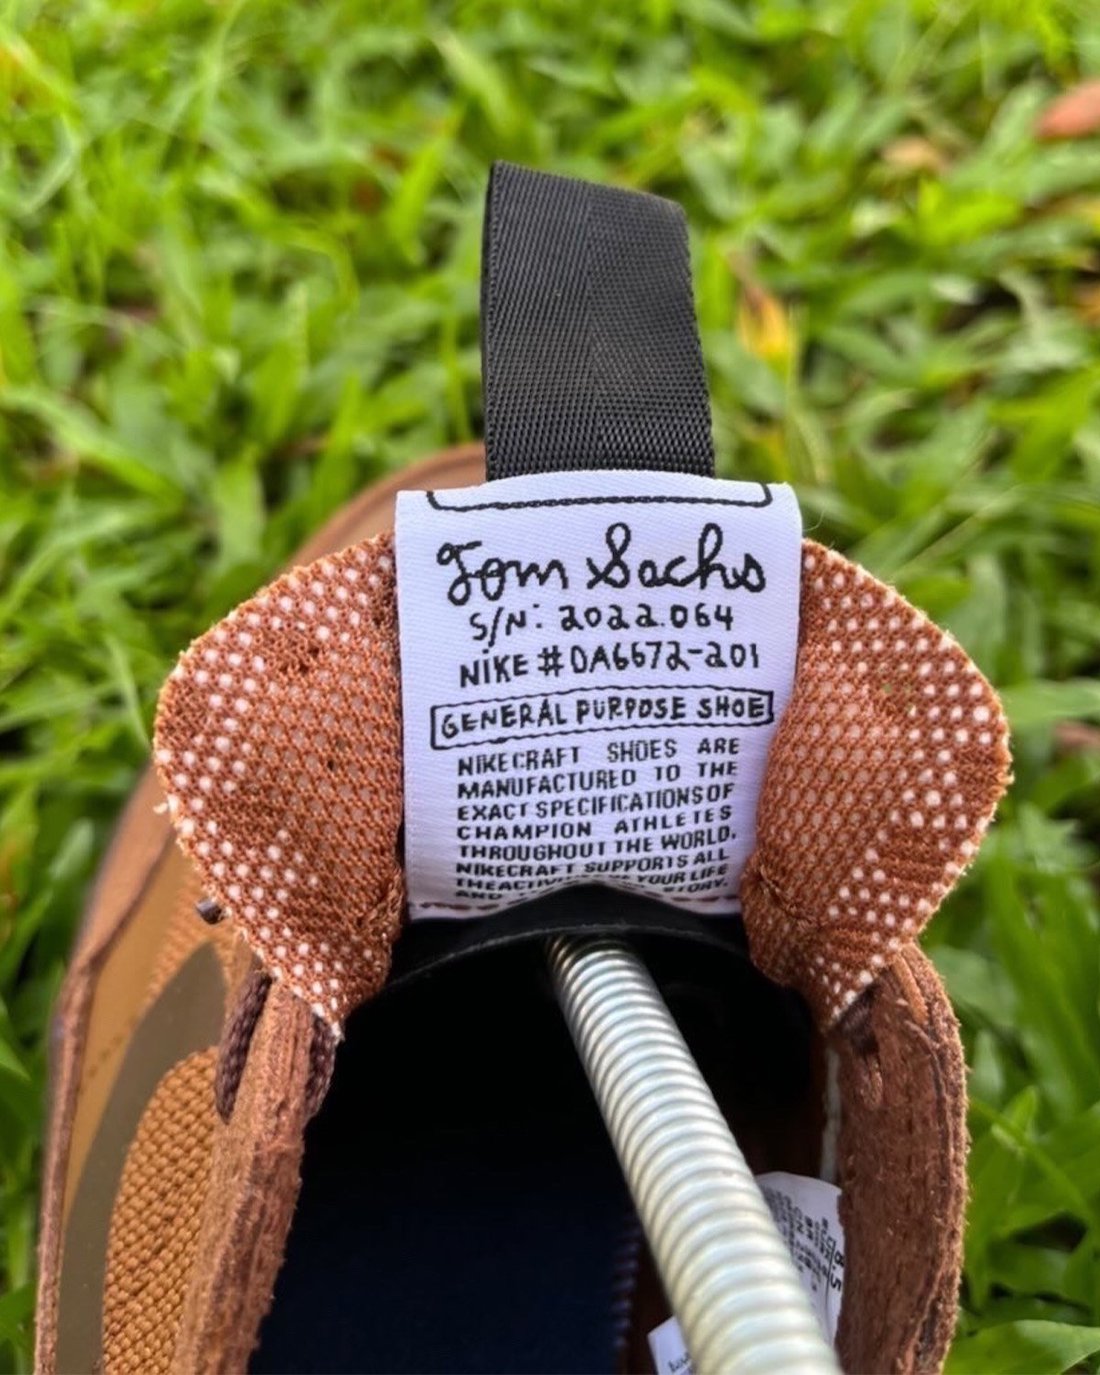 Tom Sachs Asics Packer Shoes x 3 Dirty Buck Taupe Taupe Brown DA6672-201 Release Date